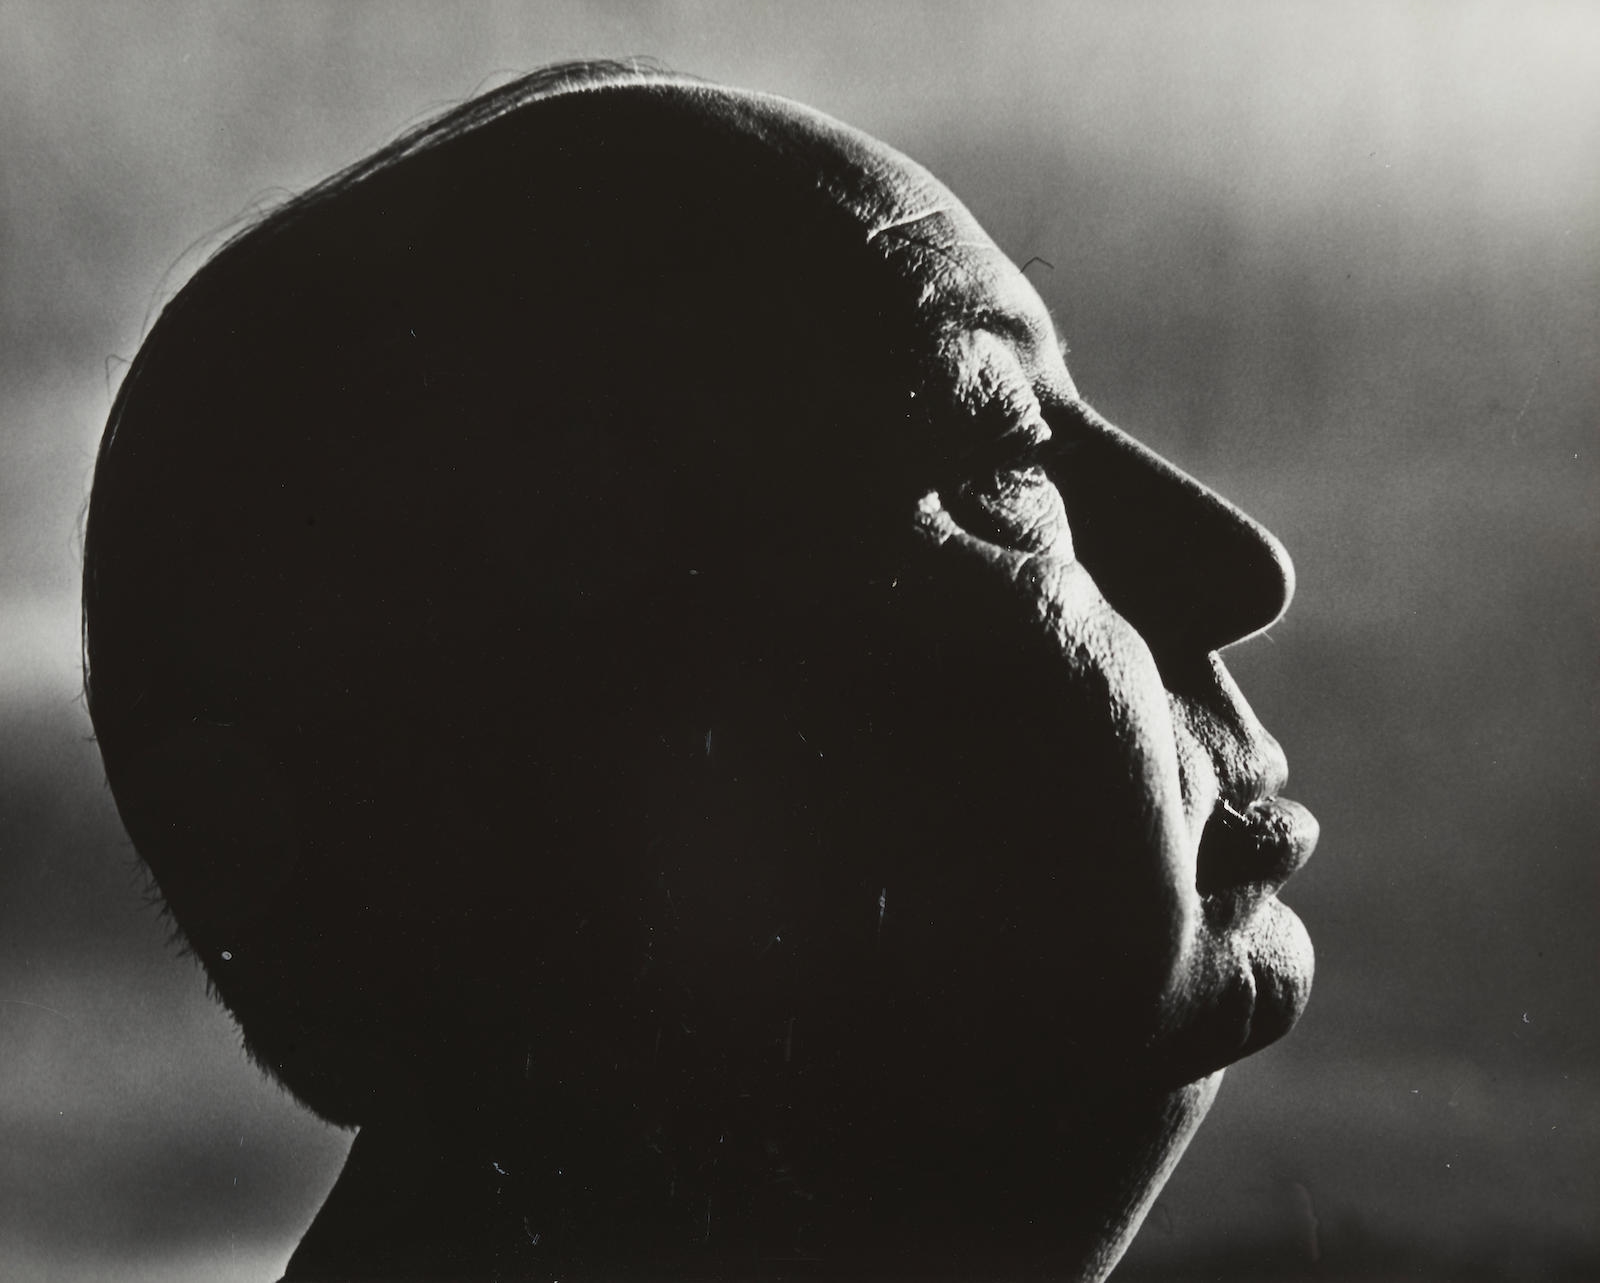 Artwork by Philippe Halsman, Alfred Hitchcock, Made of Gelatin silver print